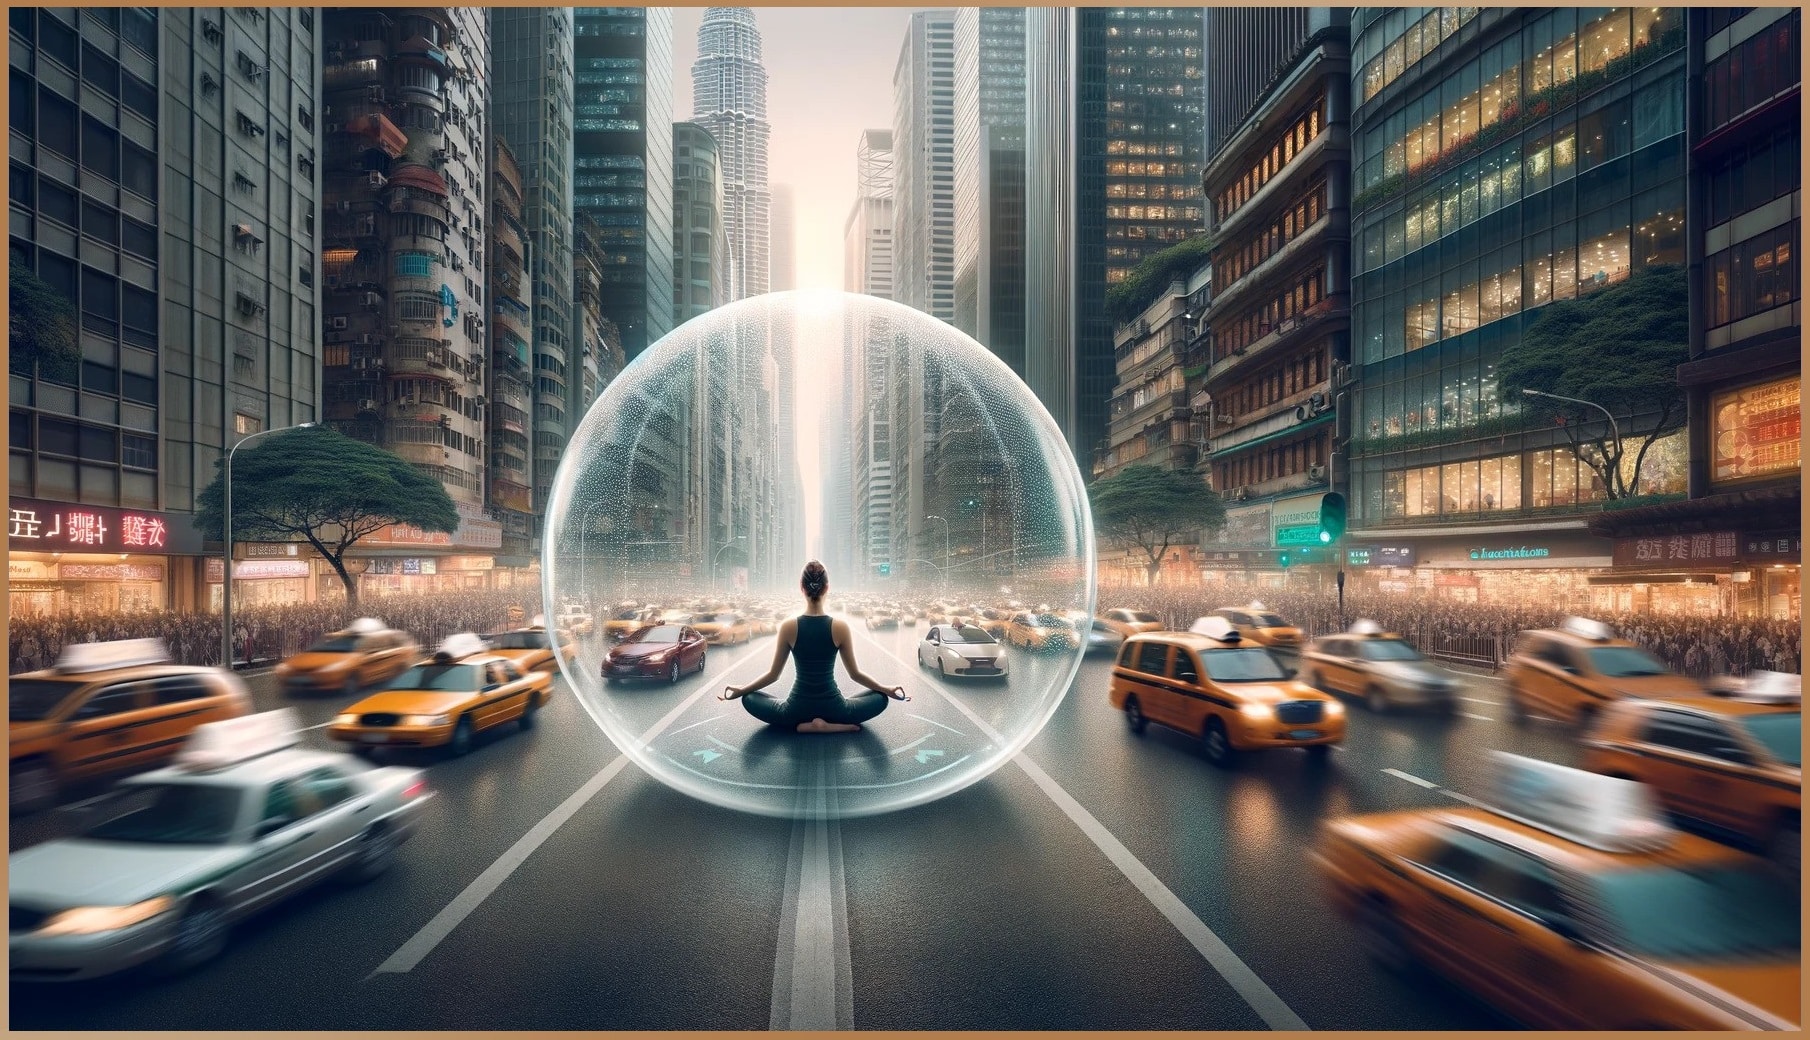 A meditative figure sits in a transparent bubble of calm, using visualization as an energetic shield against the hustle and stress of the surrounding urban environment.